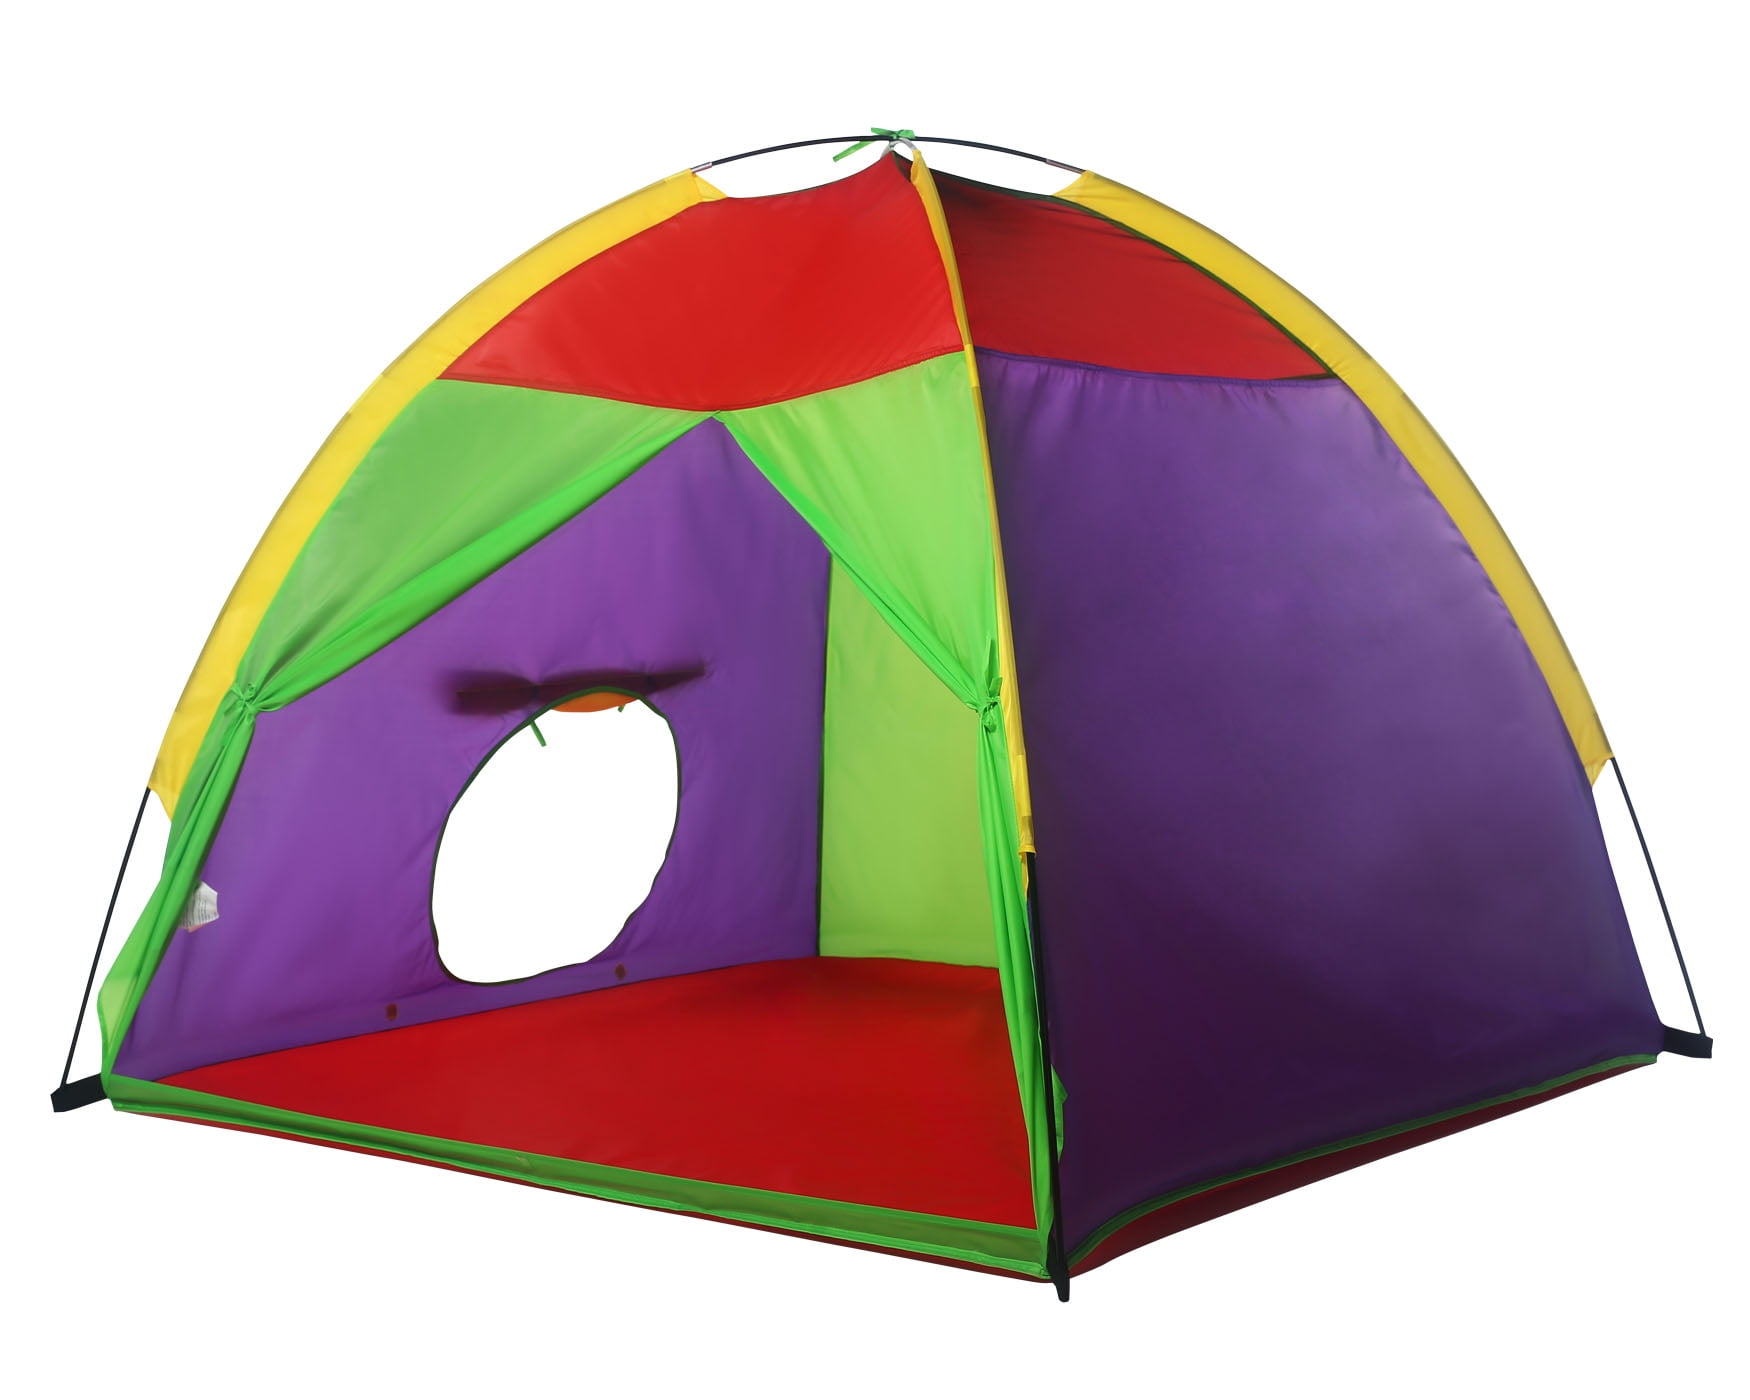 Kids Pop-Up Backyard Camping and Sleepover Tent Camping Beach Playroom Puppy